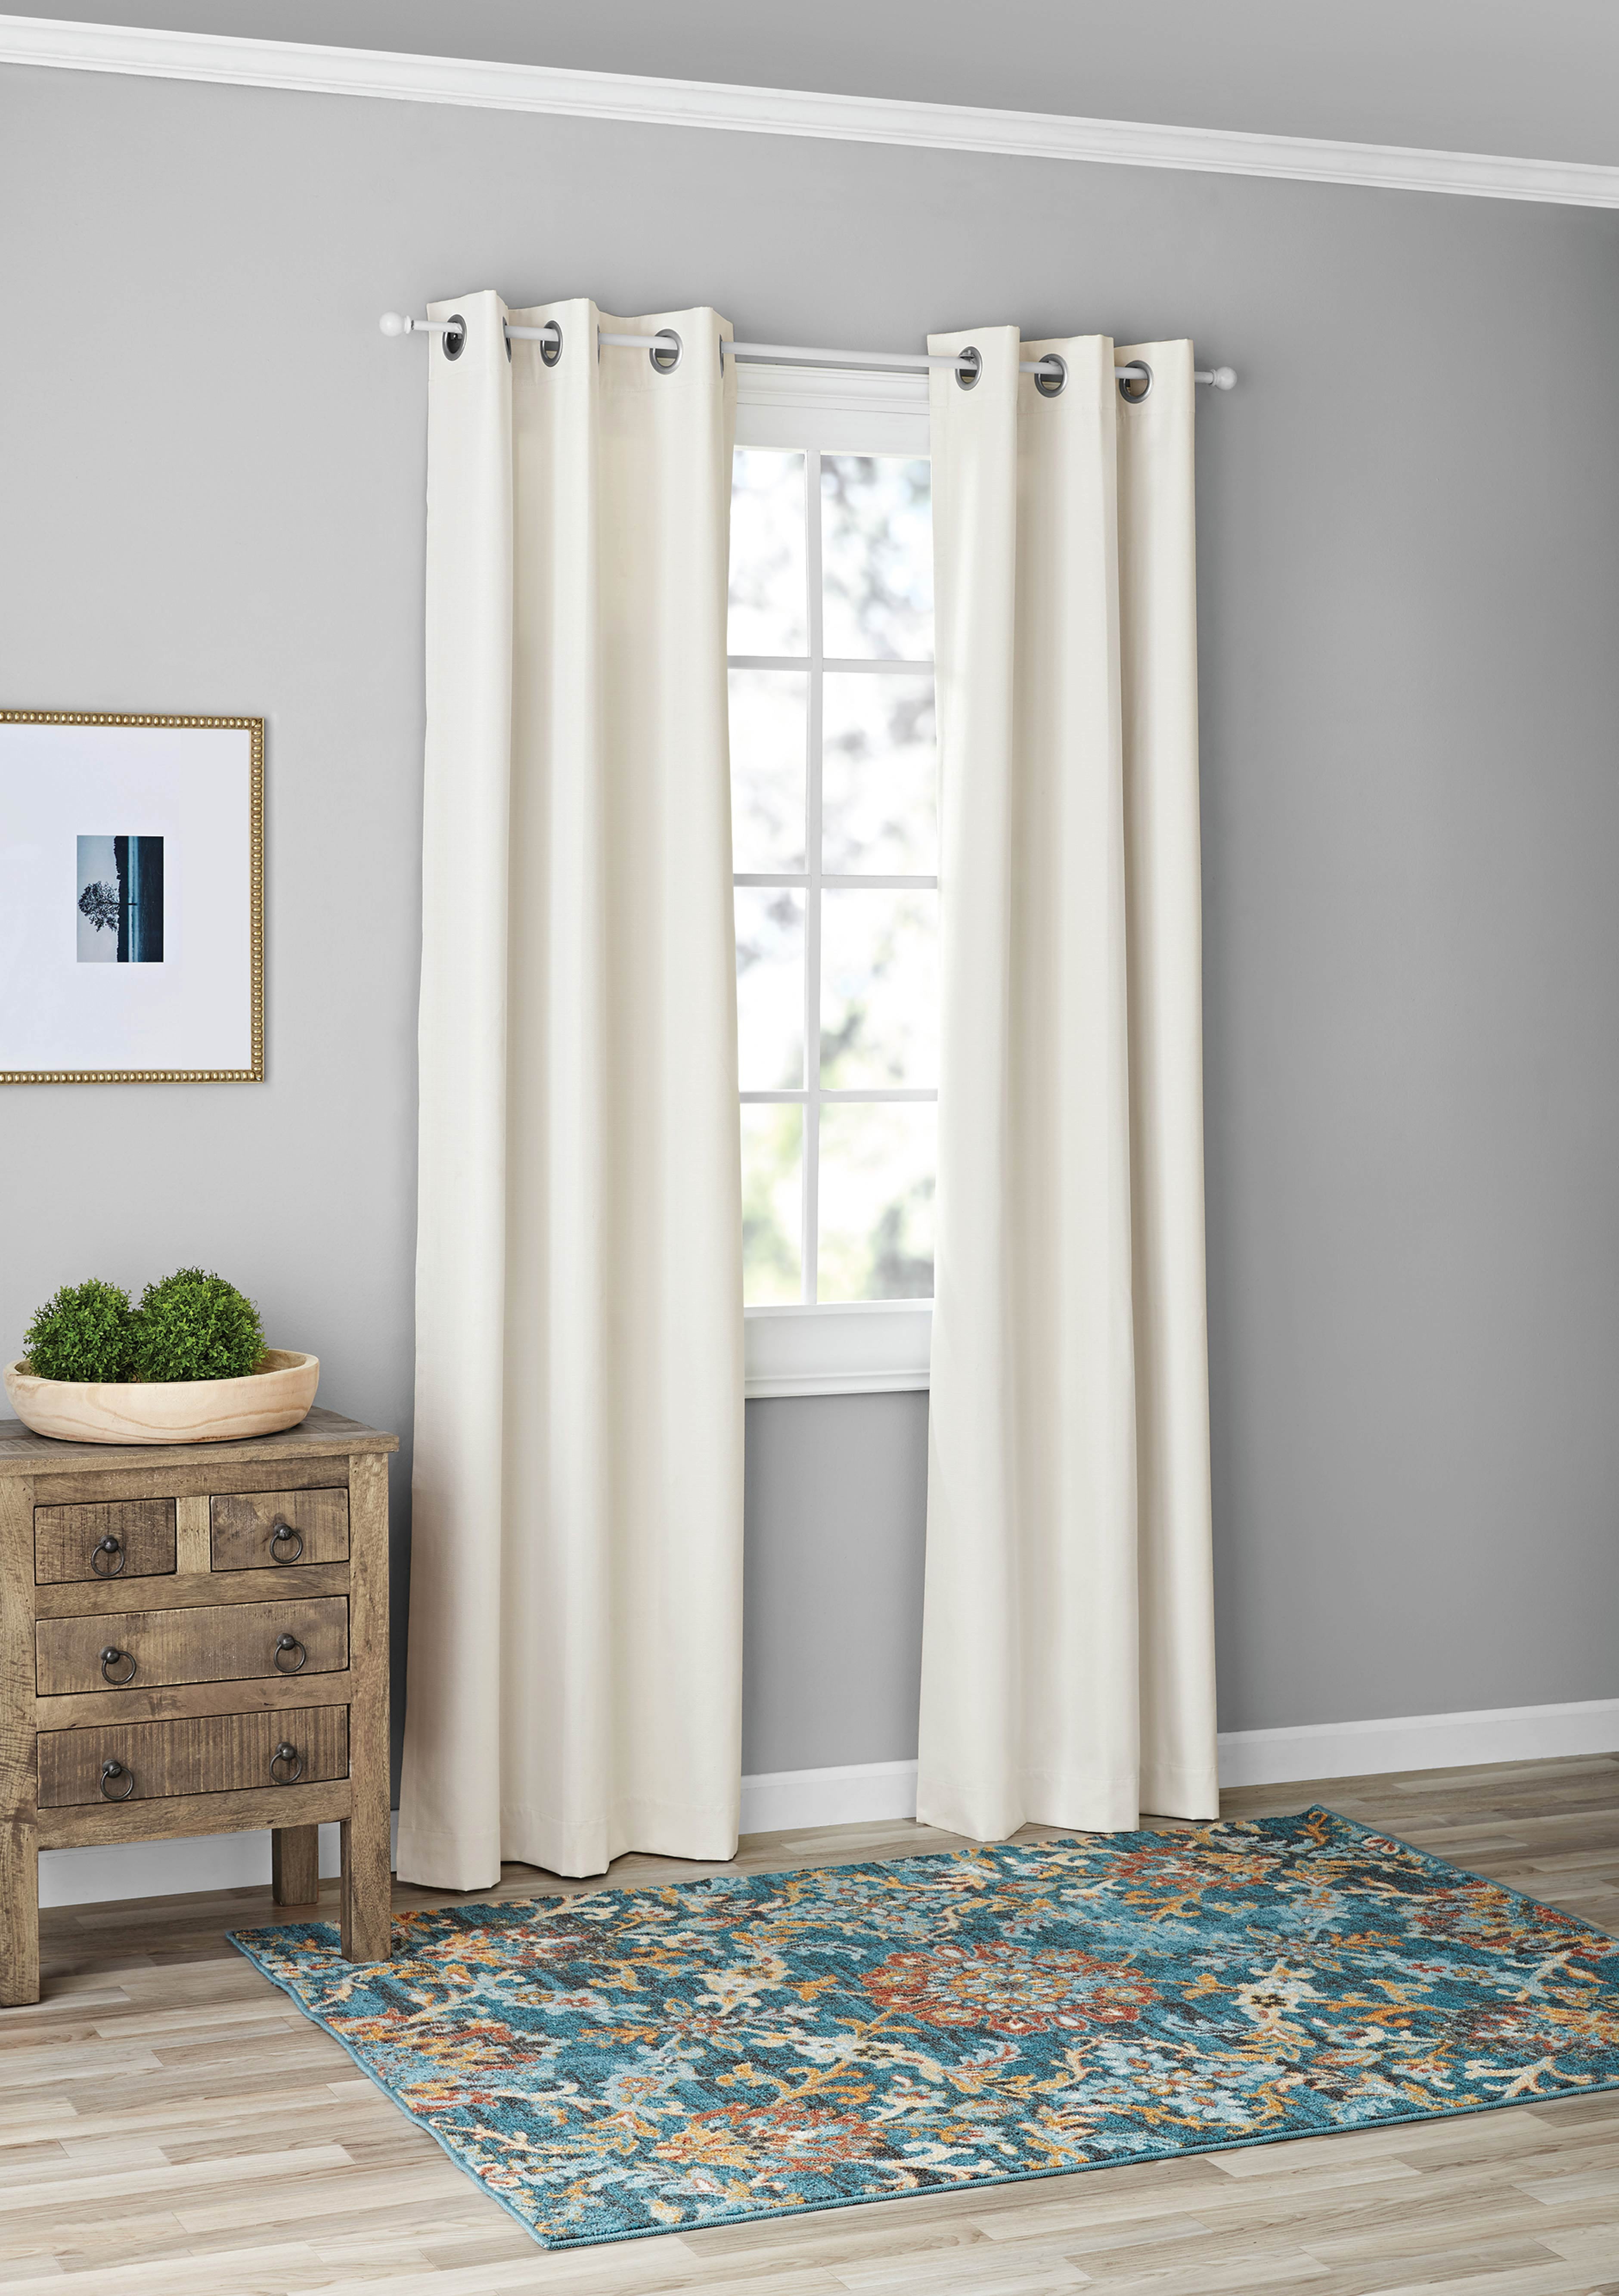 Mainstays Blackout Grommeted Curtain Panel Pair, Set of 2, White Solid ...